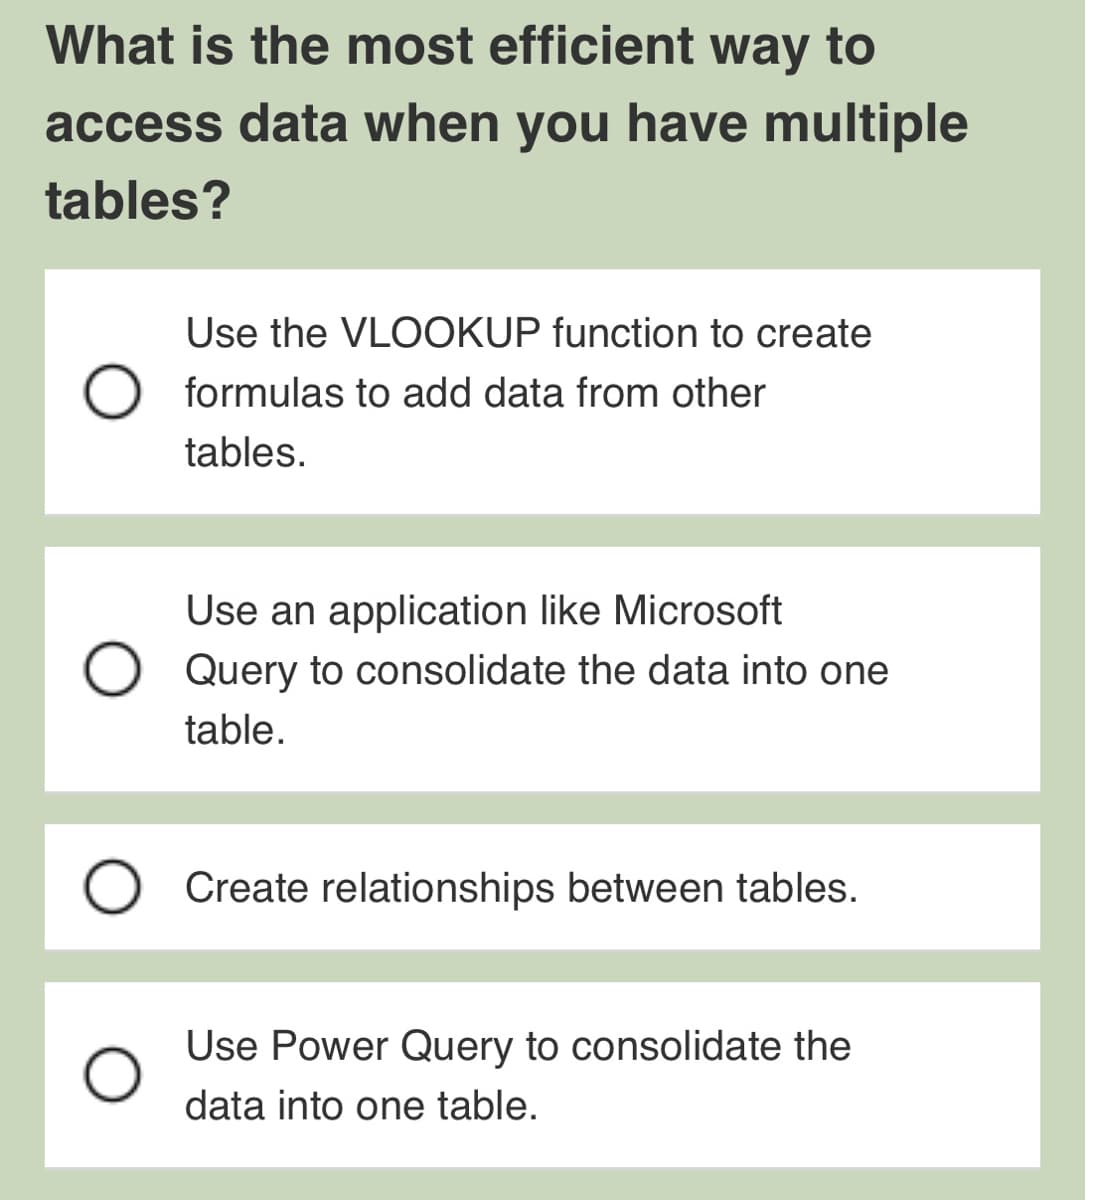 What is the most efficient way to
access data when you have multiple
tables?
O
Use the VLOOKUP function to create
formulas to add data from other
tables.
Use an application like Microsoft
Query to consolidate the data into one
table.
Create relationships between tables.
Use Power Query to consolidate the
data into one table.